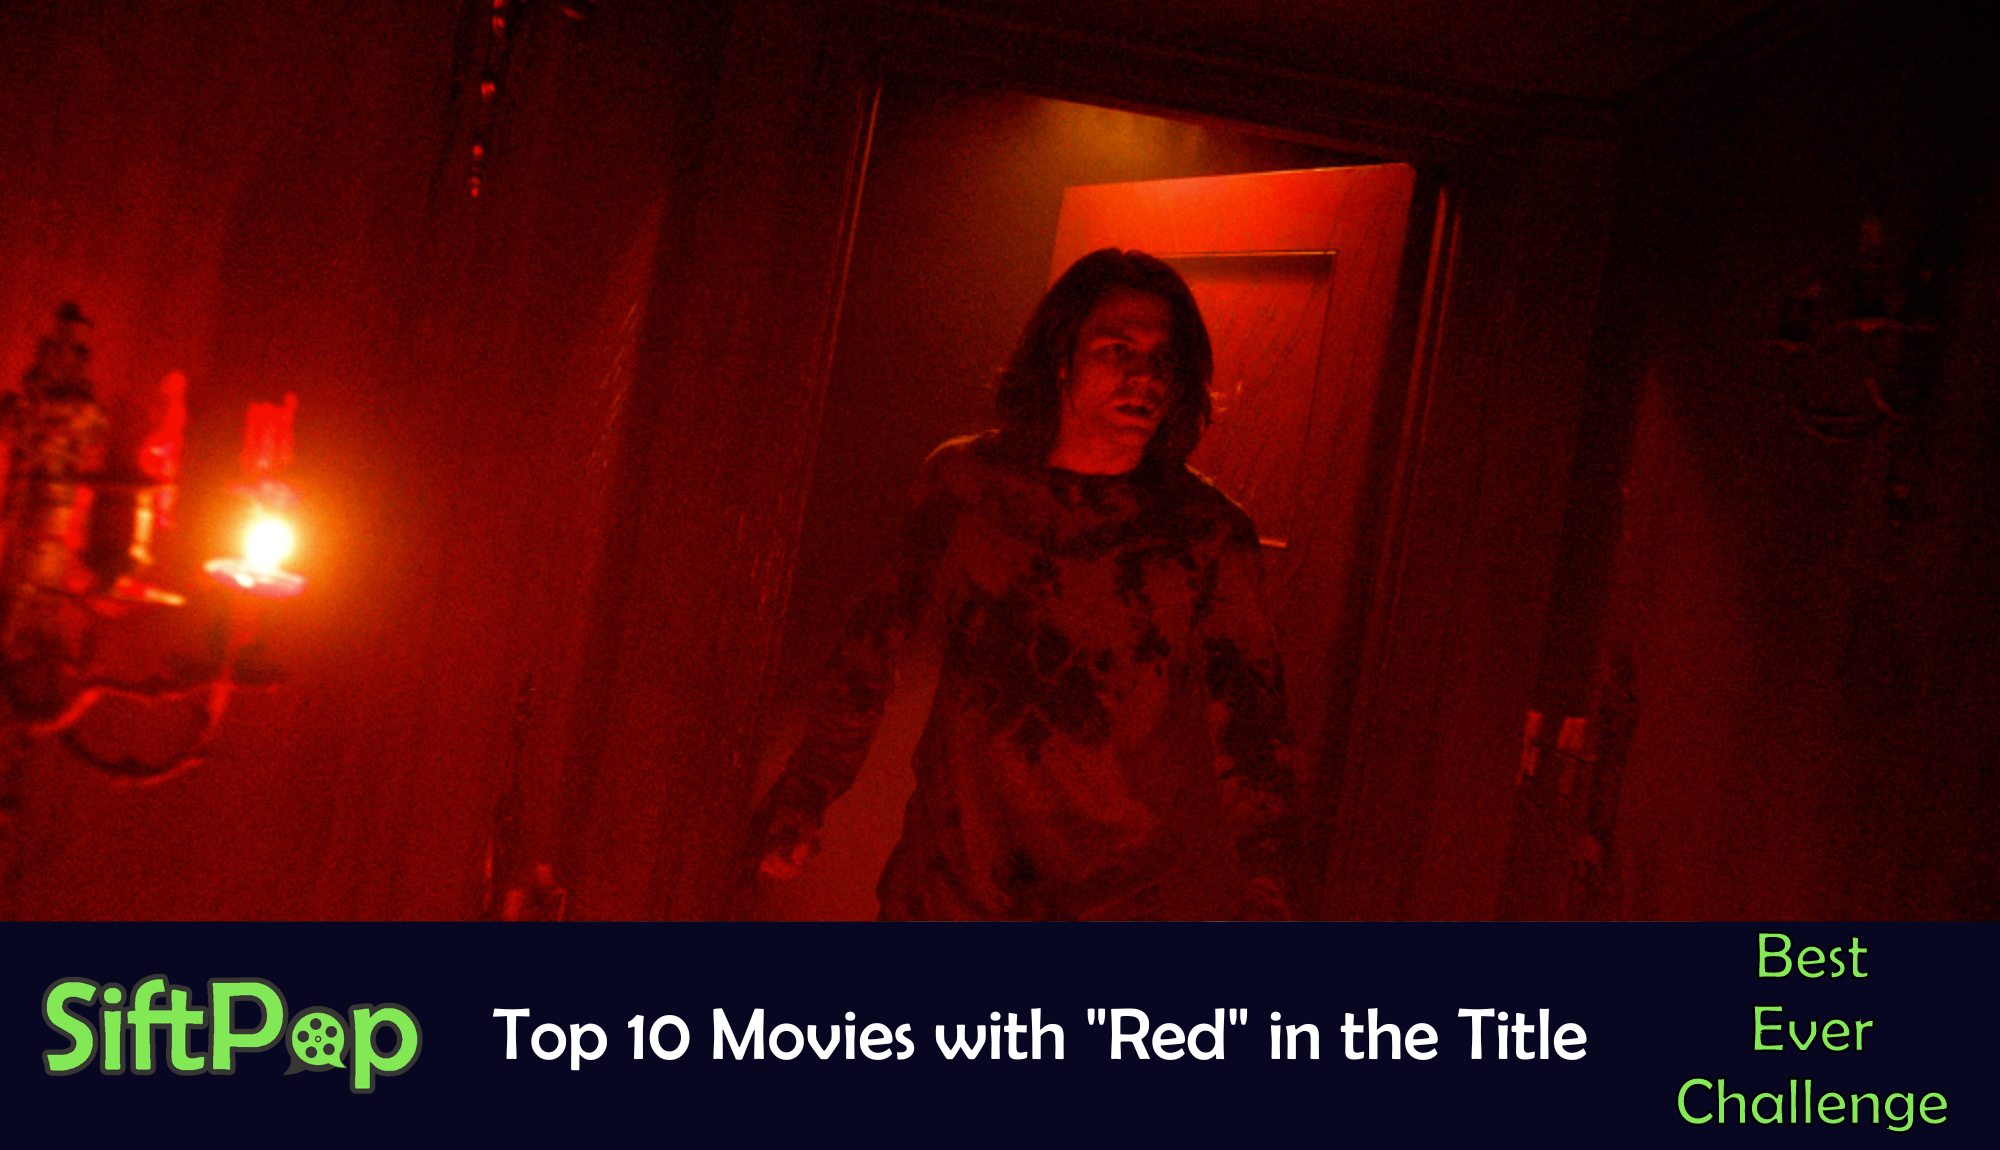 SiftPopTop 10 Movies with “Red” in the Title